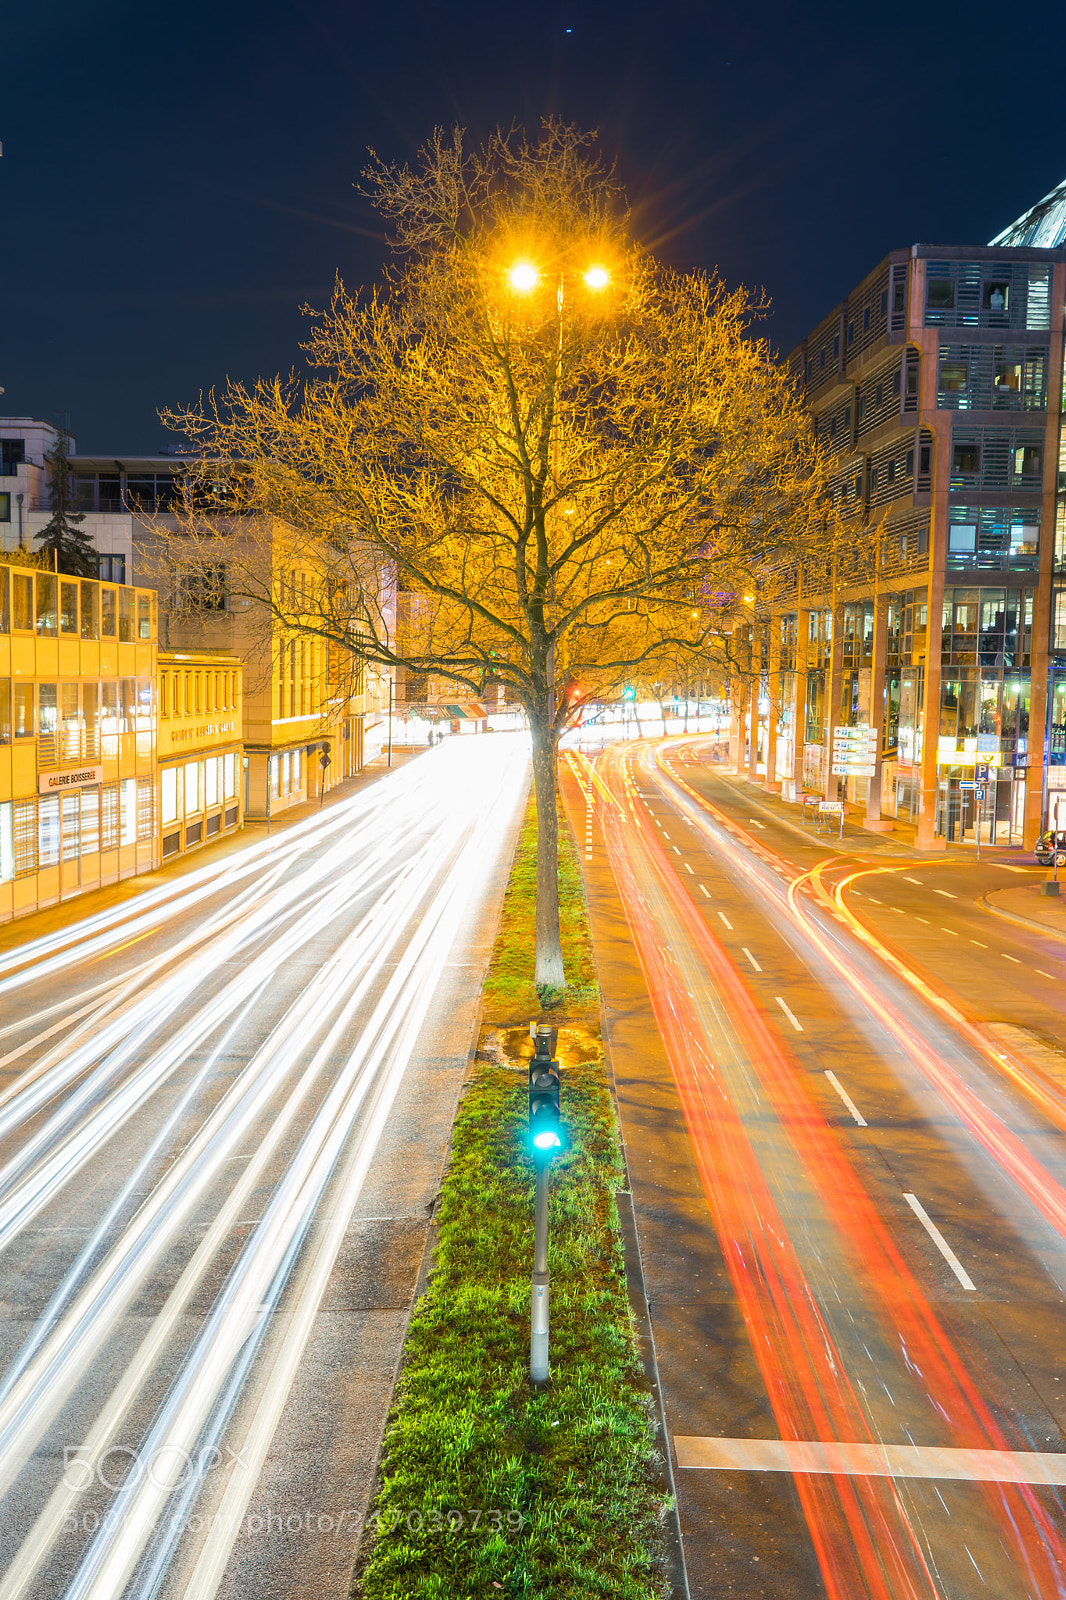 Sony a7 II sample photo. Light trails in cologne photography